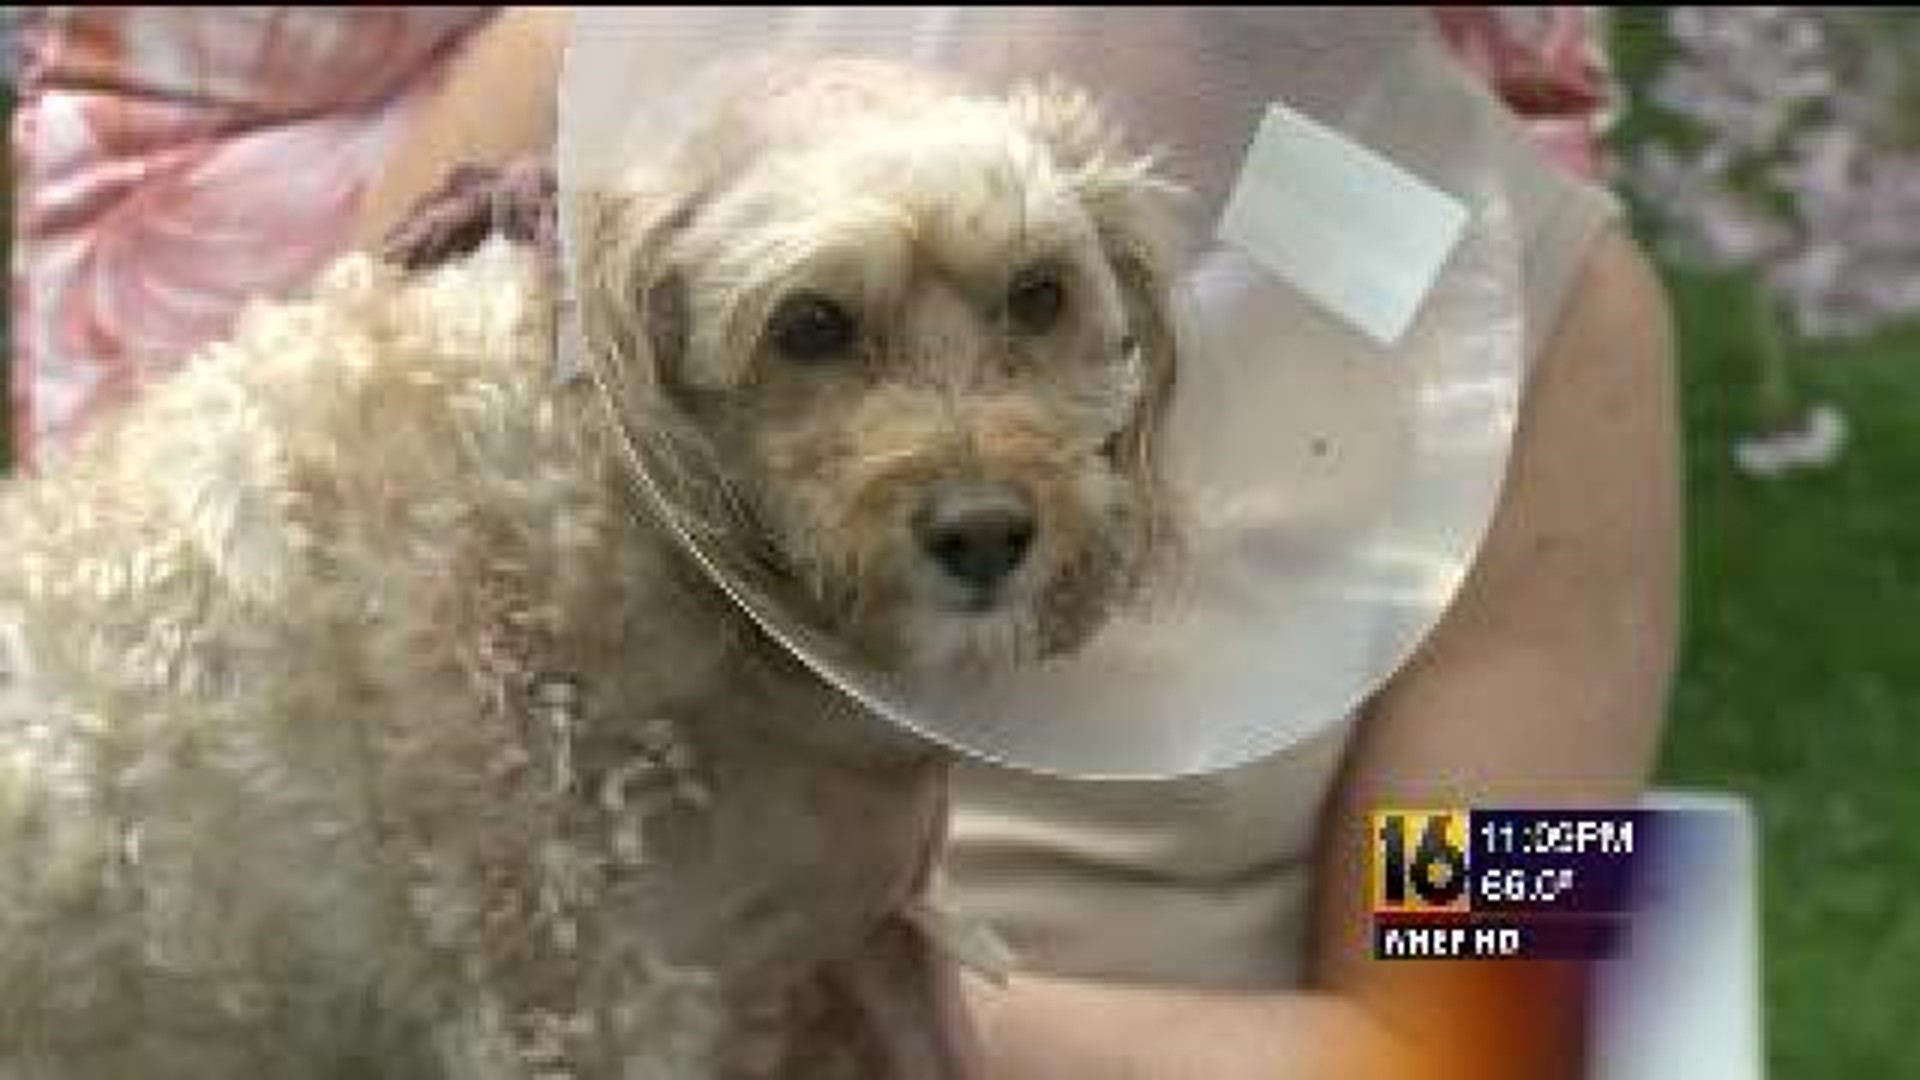 Pit Bull Owner Cited for Dog Mauling